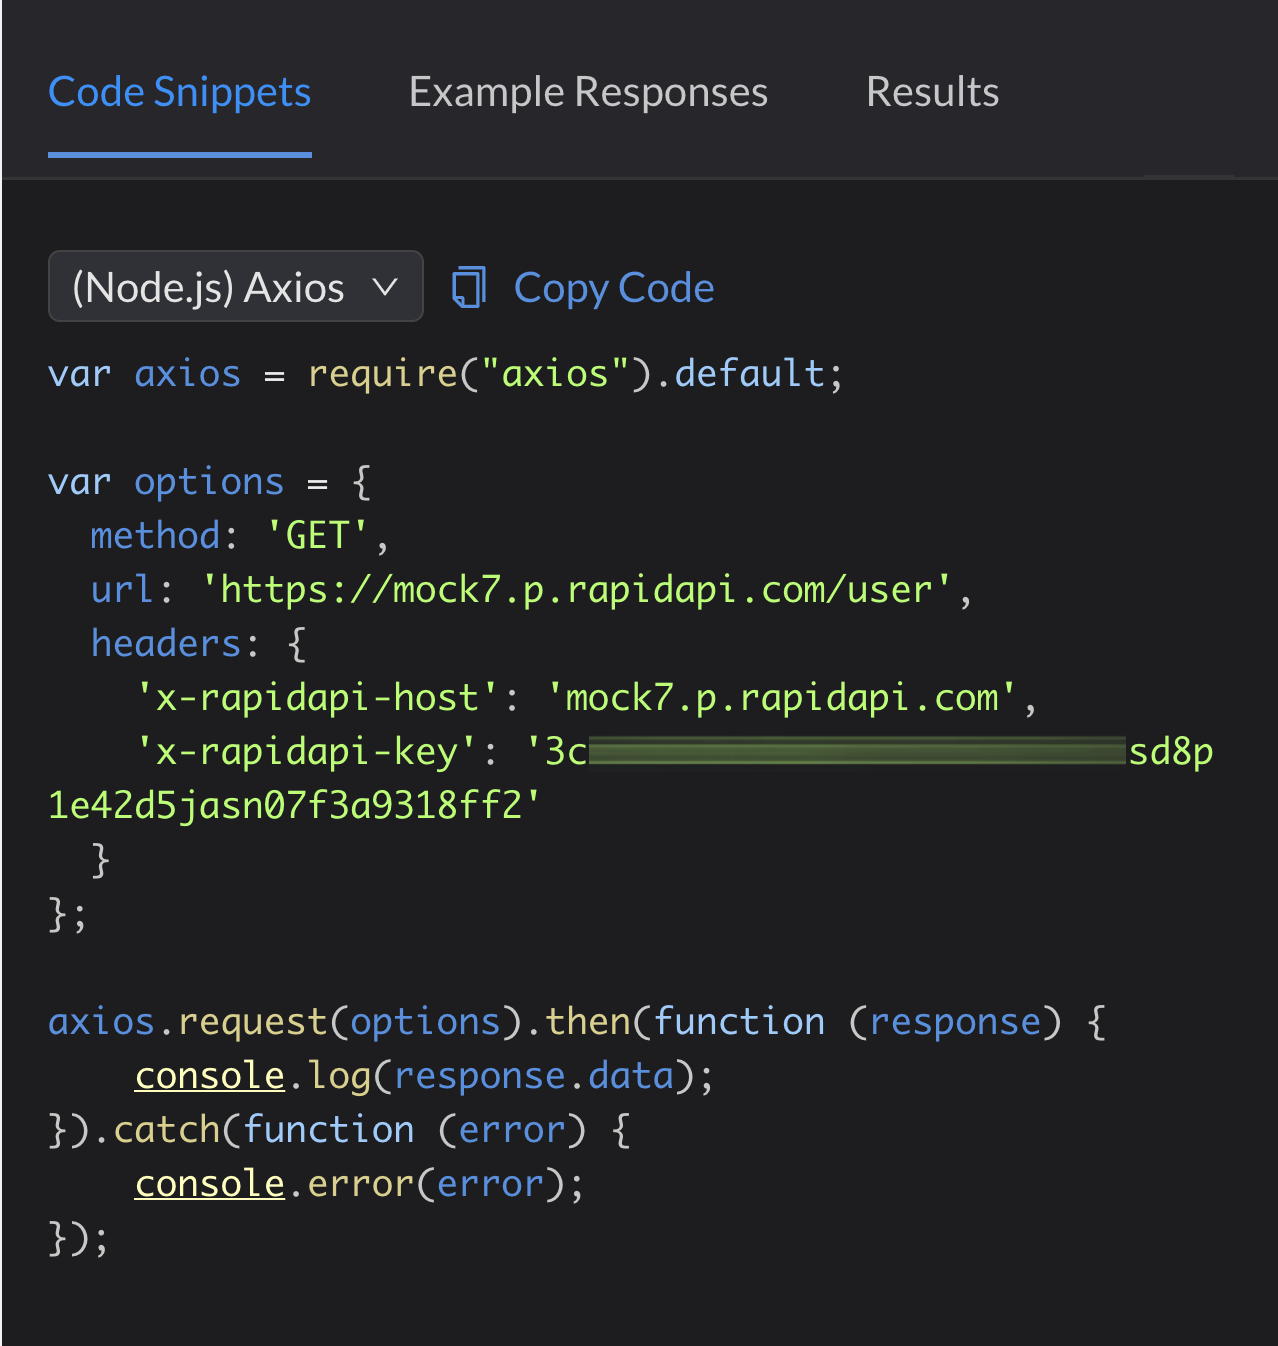 Code Snippet in Node.js for accessing our Mock API